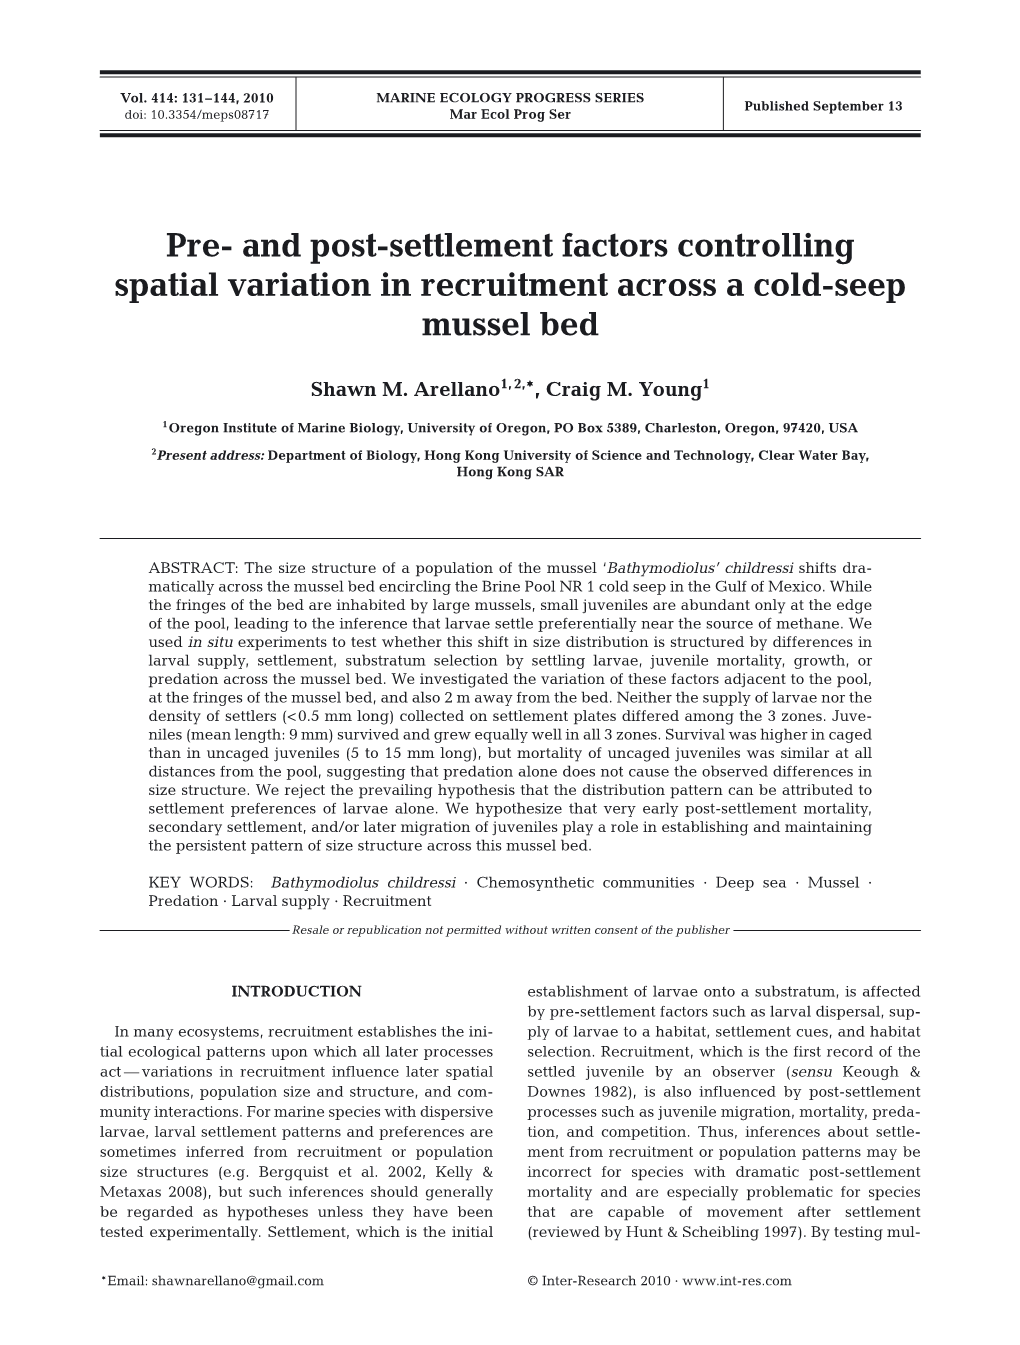 Pre-And Post-Settlement Factors Controlling Spatial Variation In